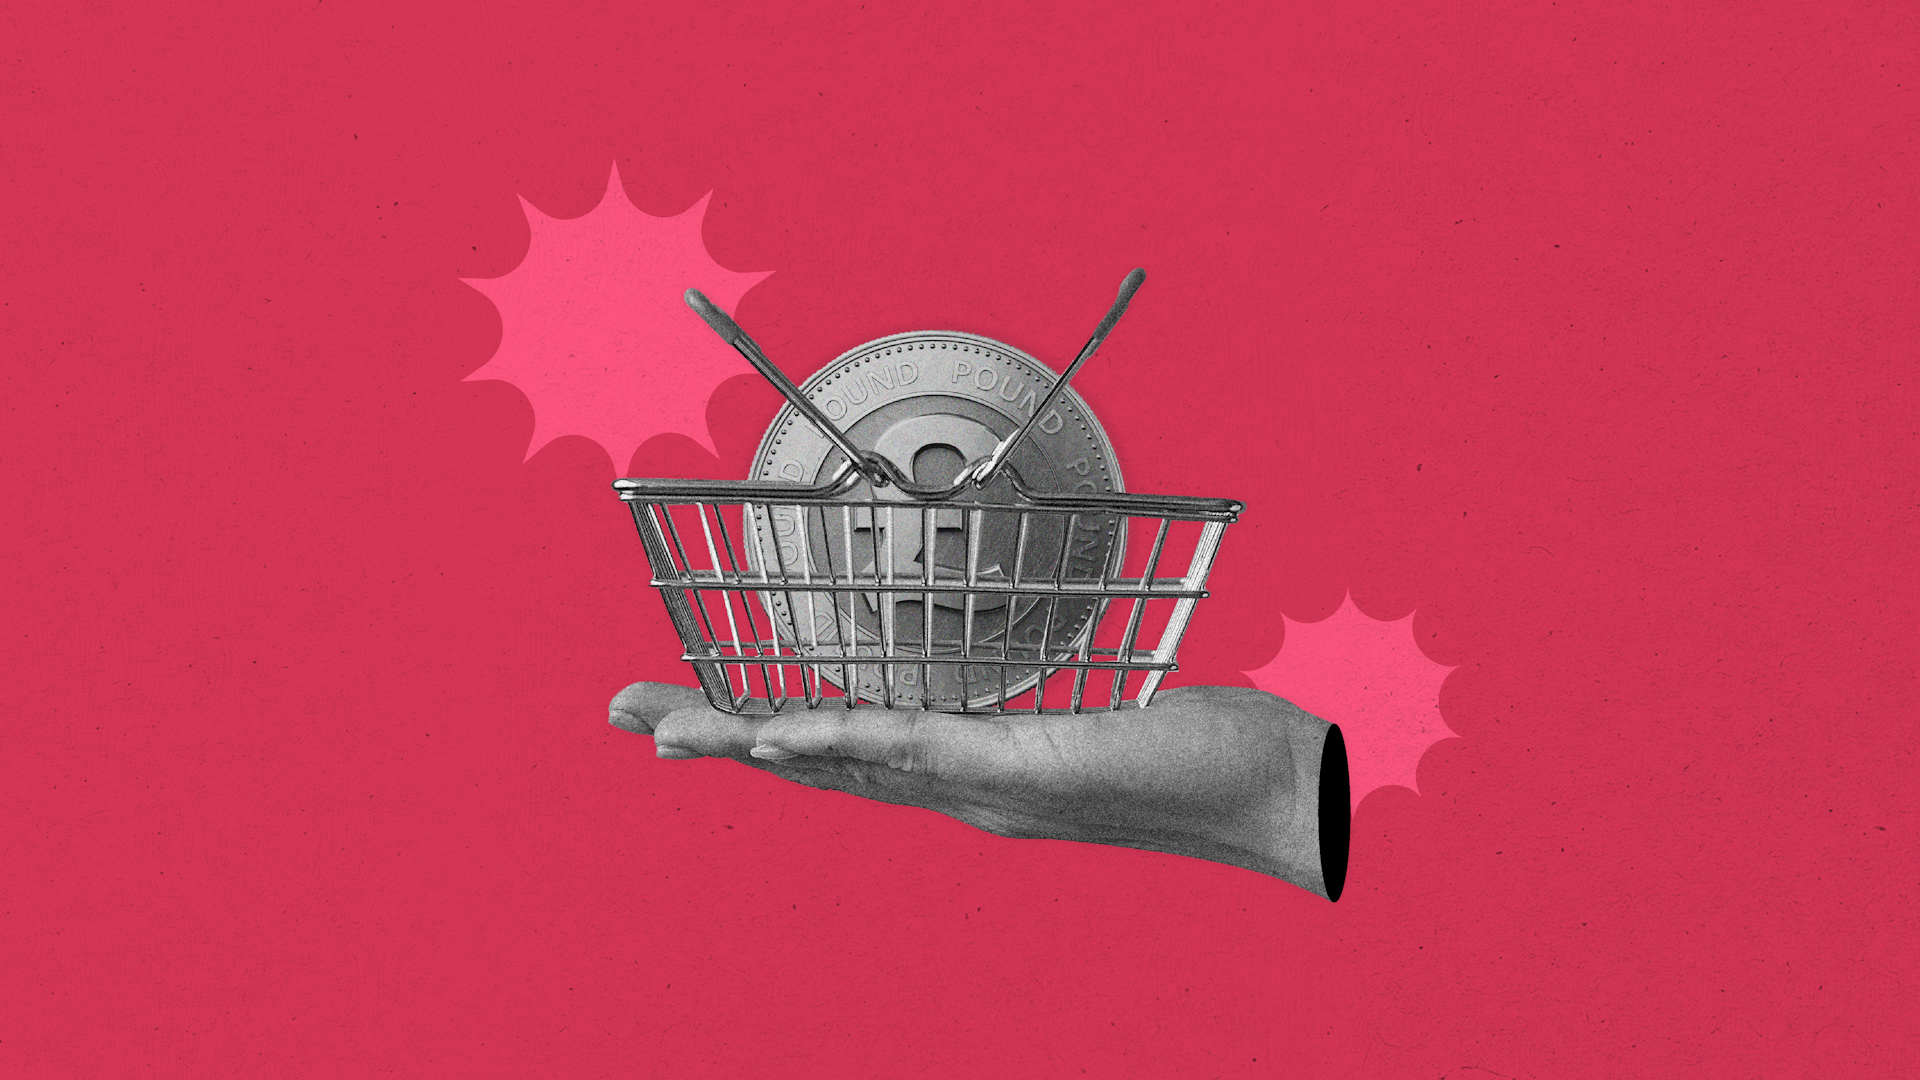 A collage image of a hand holding a shopping basket with a large coin in it on a pink background.